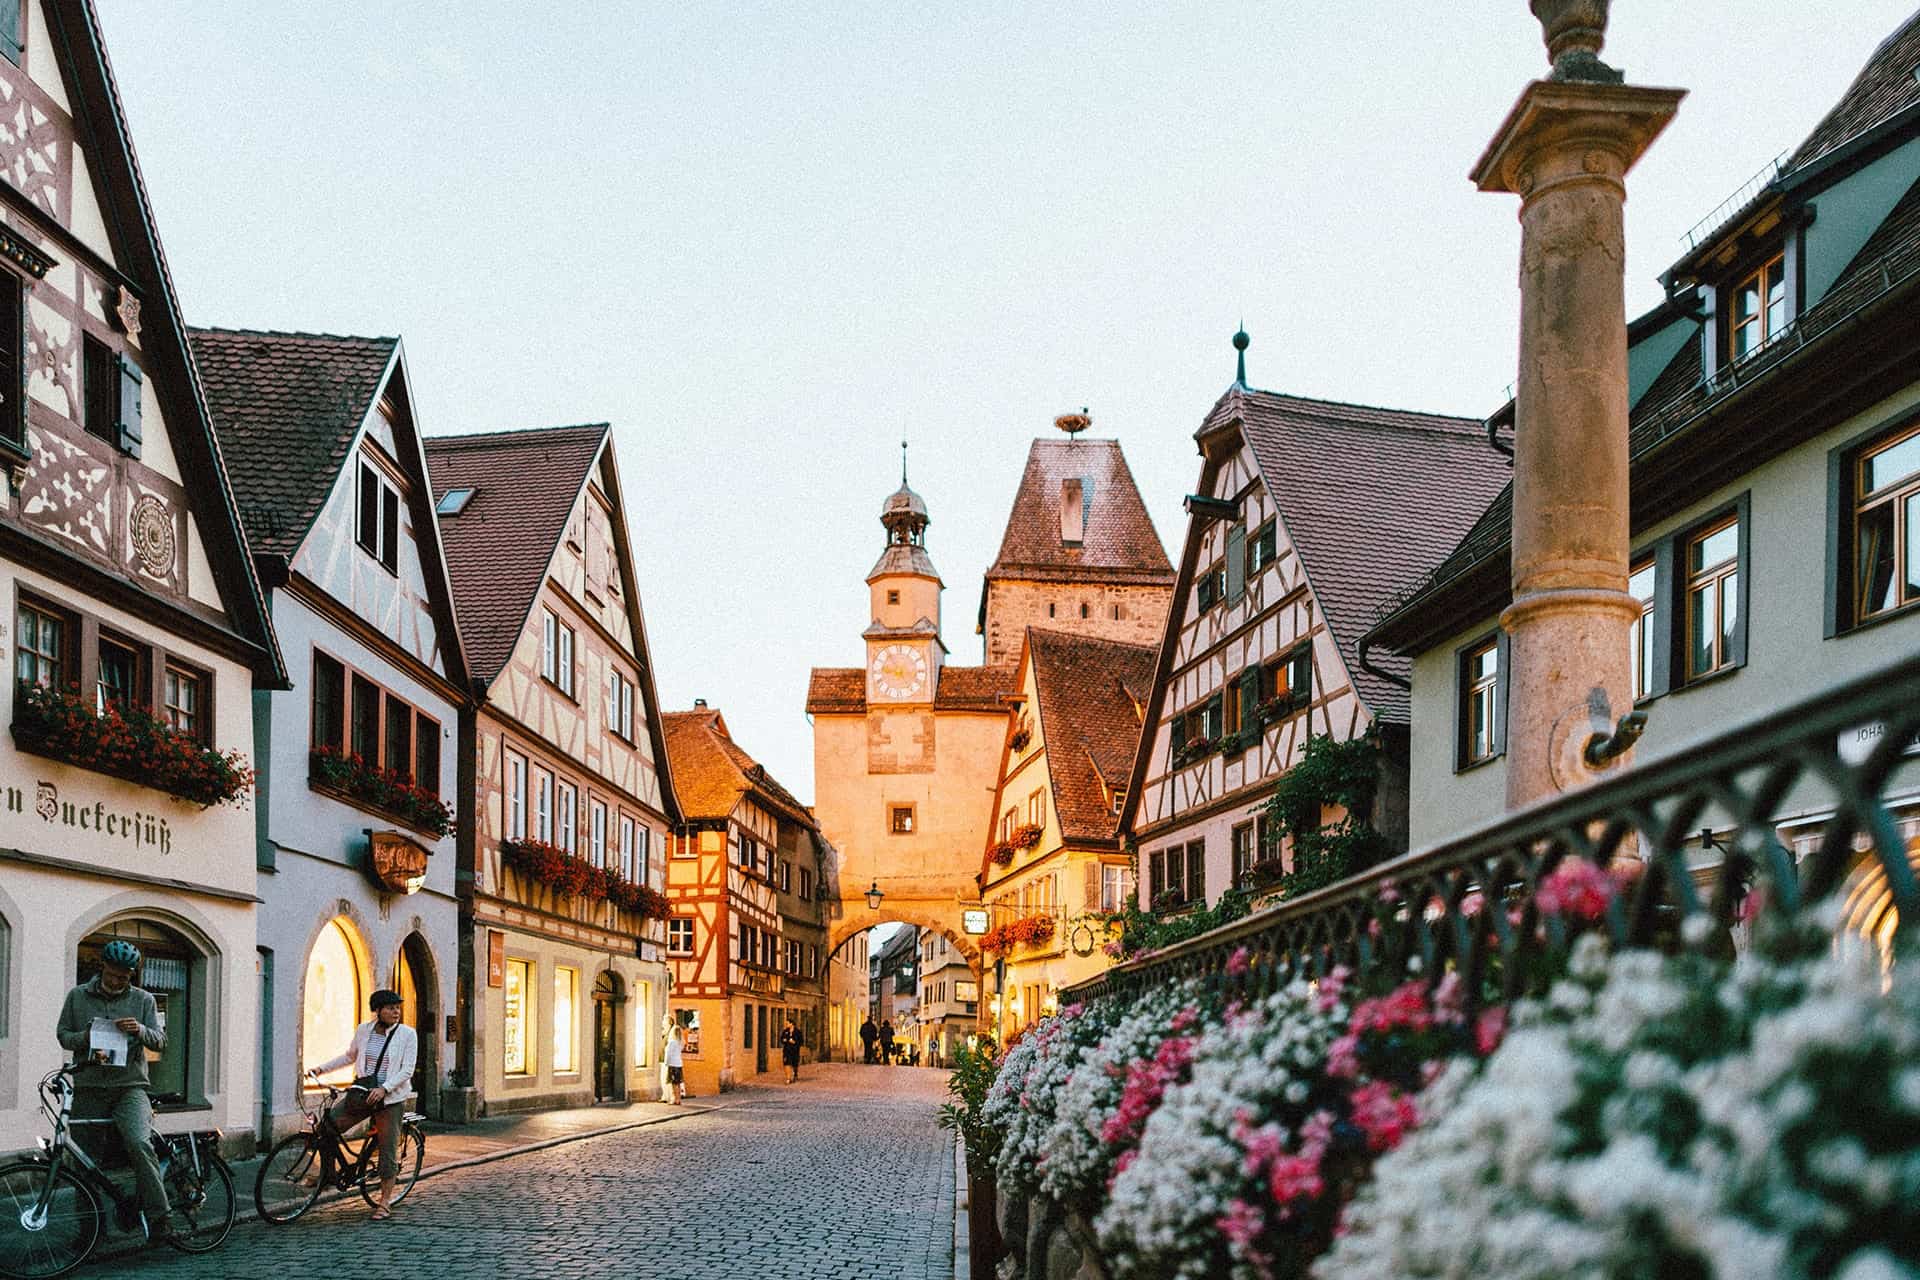 Twilight over a charming European old town street with traditional half-timbered houses and a clock tower in the background, captured in the "Train Travel Guide" for beginners.